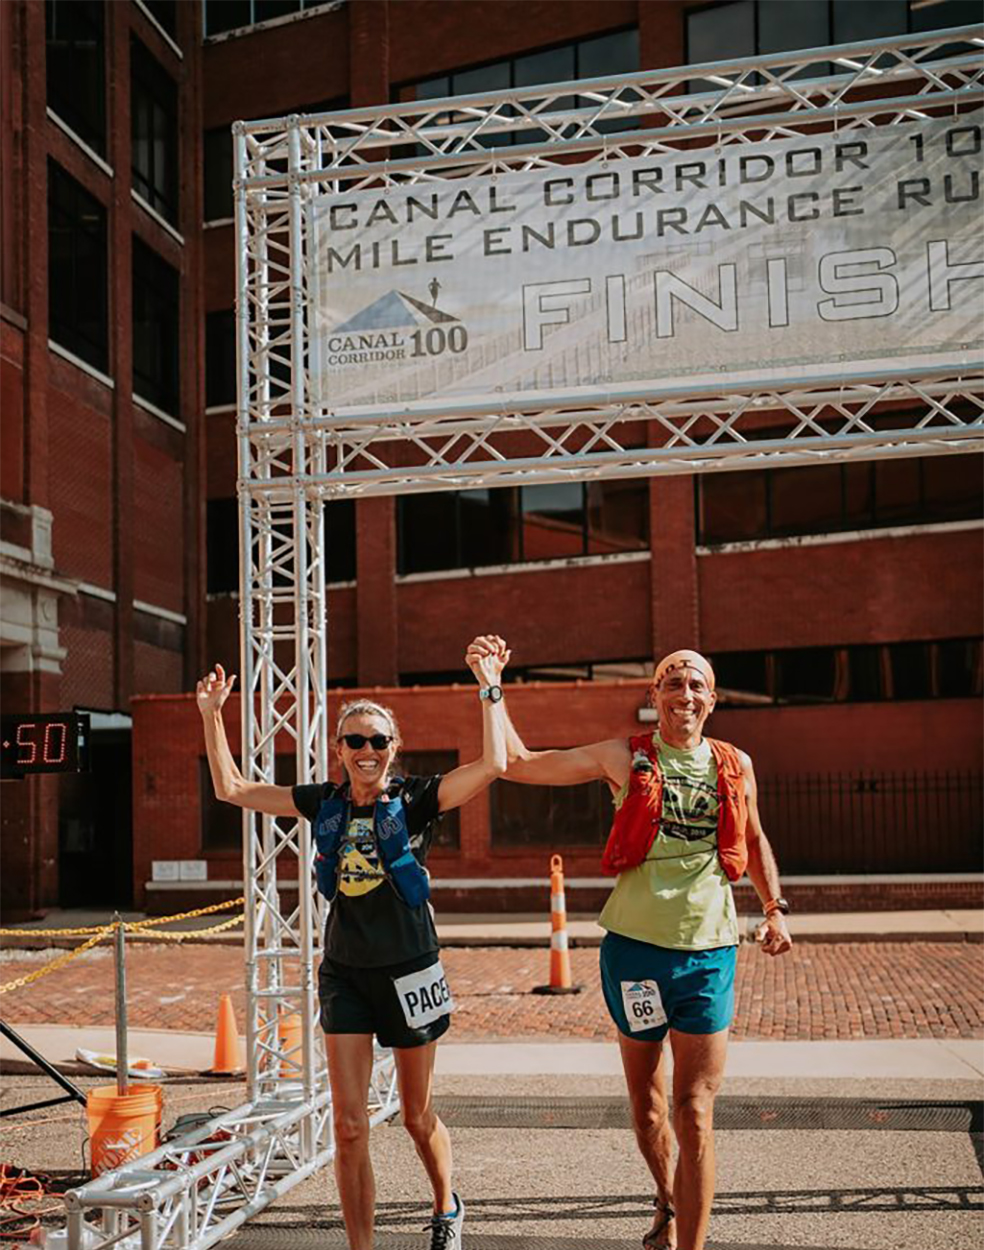 Randy Kreill changed his lifestyle dramatically after his cancer diagnosis. That included long distance runs, which he does in minimalist shoes. He is crossing the finish line at the Canal Corridor 100 Mile Race in July 2020 with his wife Megan.